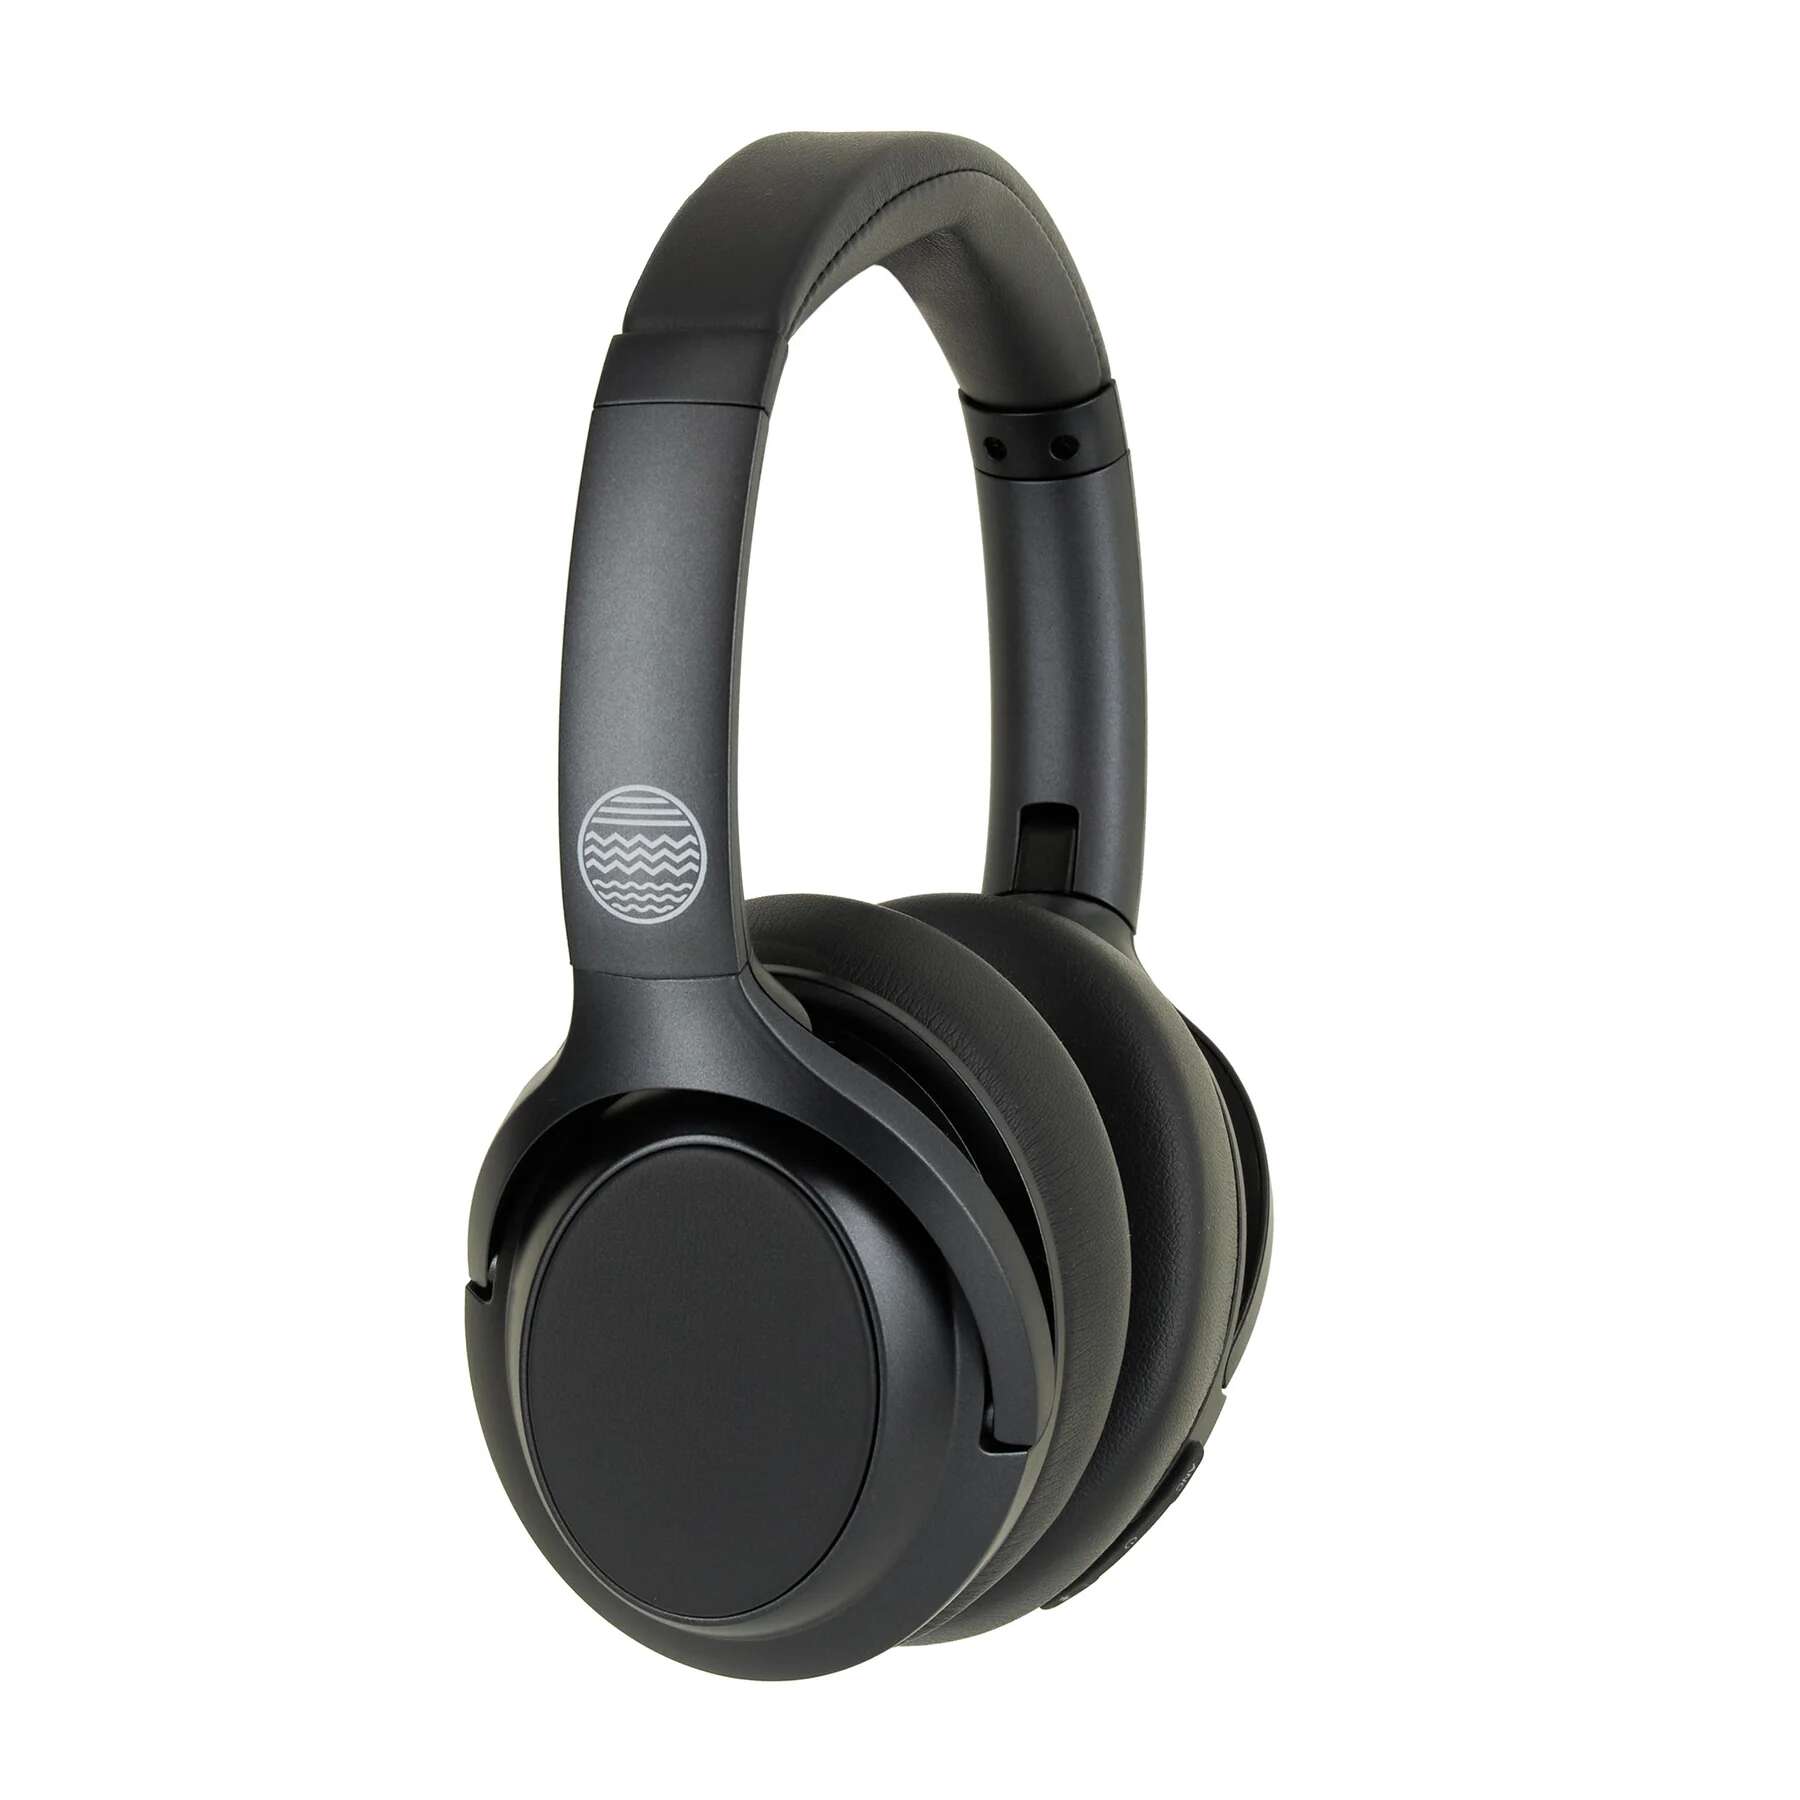 Our pure planet opp137 wireless headset - fekete